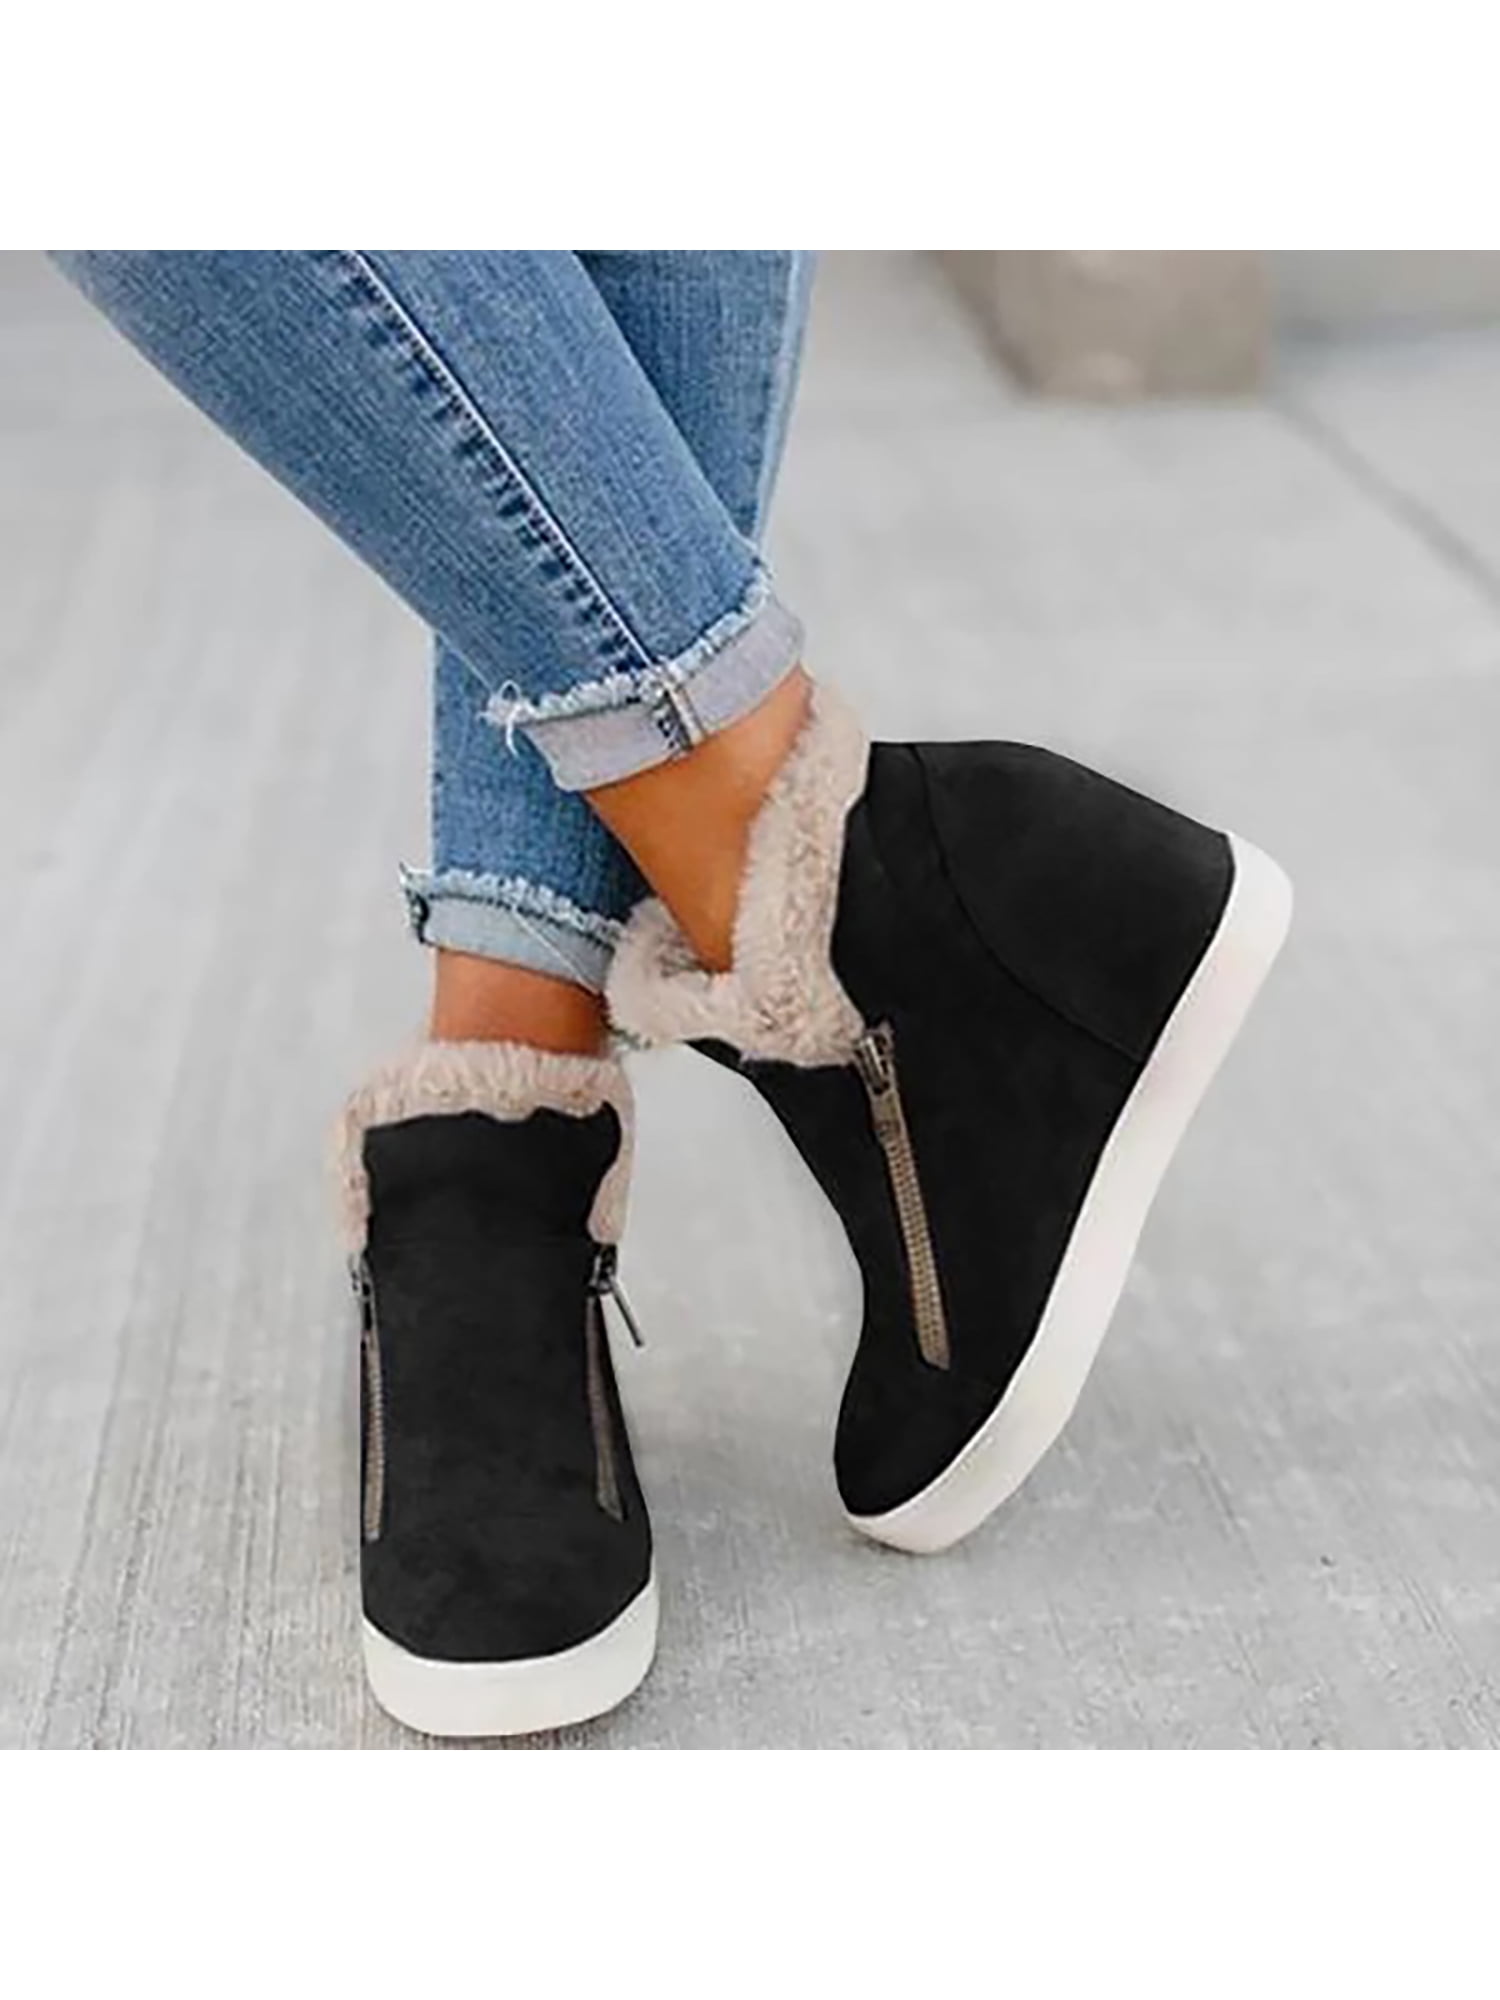 Womens Short Leather Boots Wedge Hidden Heel Ankle Boots Side Zipper Pumps Shoes